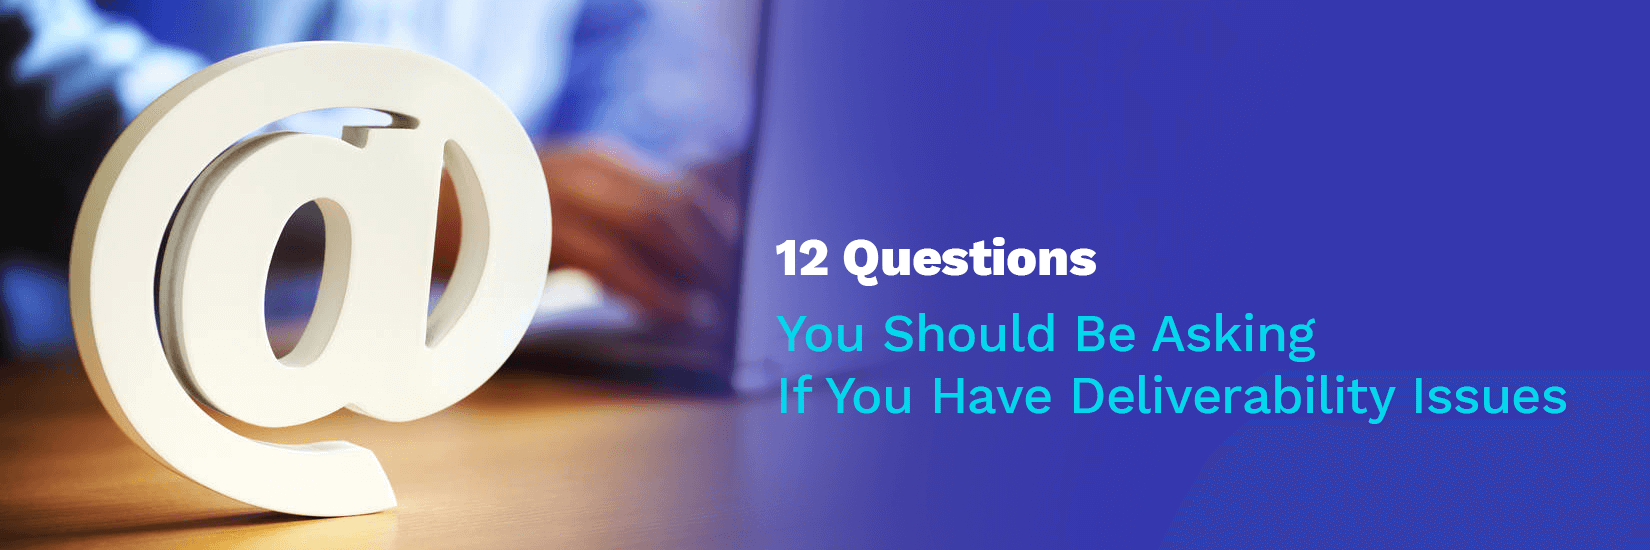 12 Questions You Should Be Asking If You Have Deliverability Issues